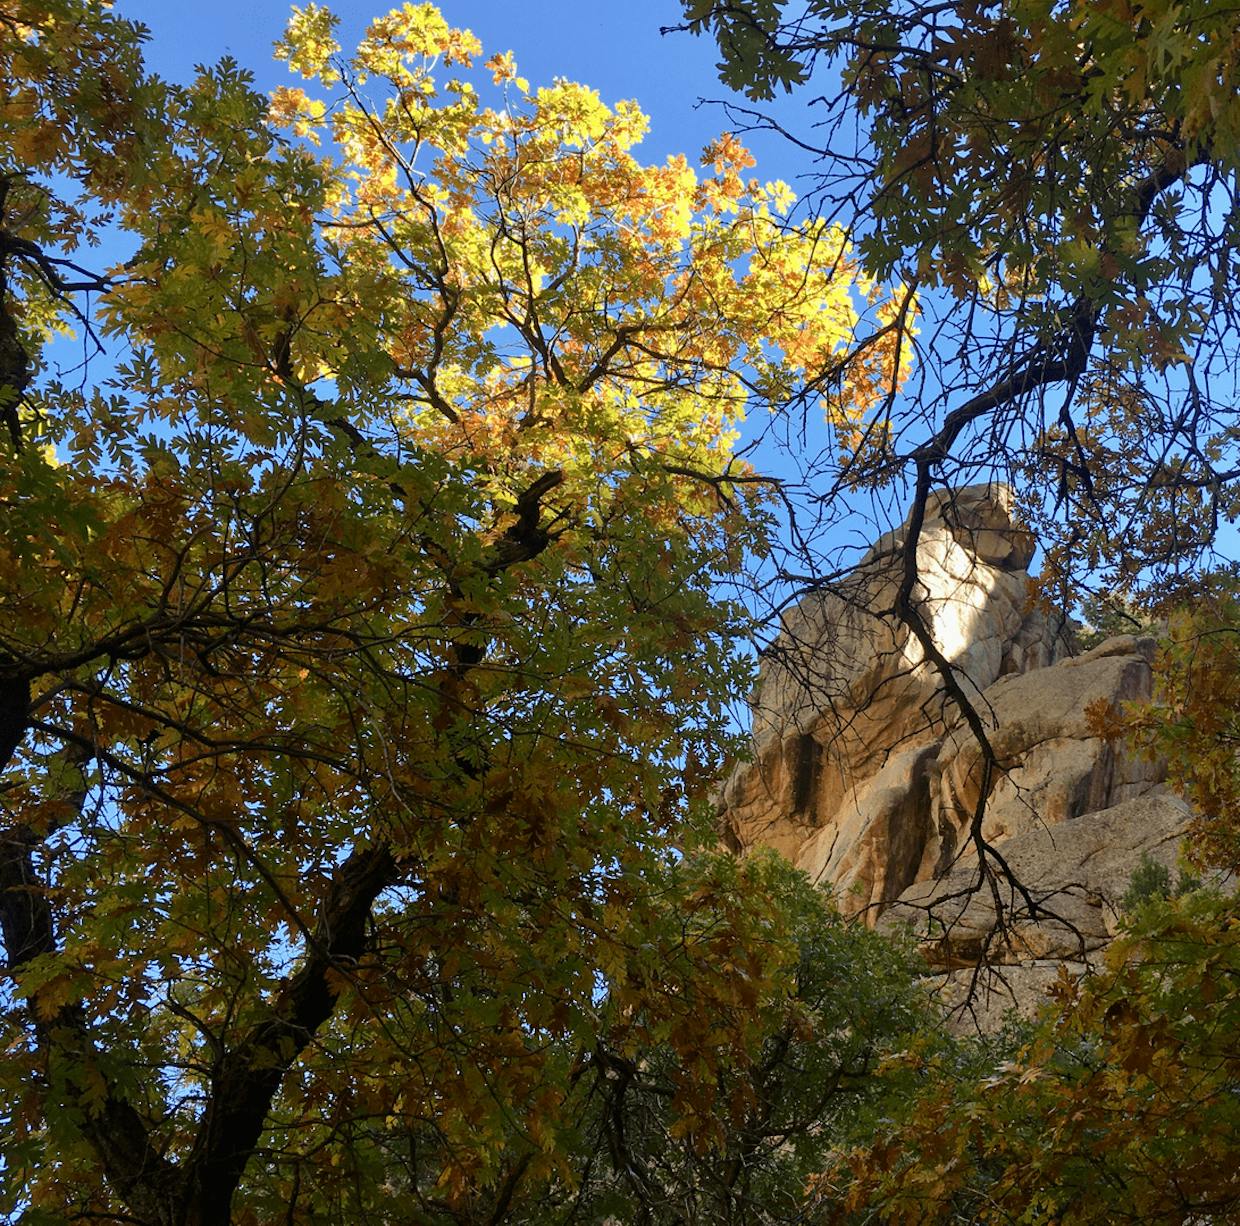 Another patch of yellow leaves in a tall tree with tan canyon wall behind